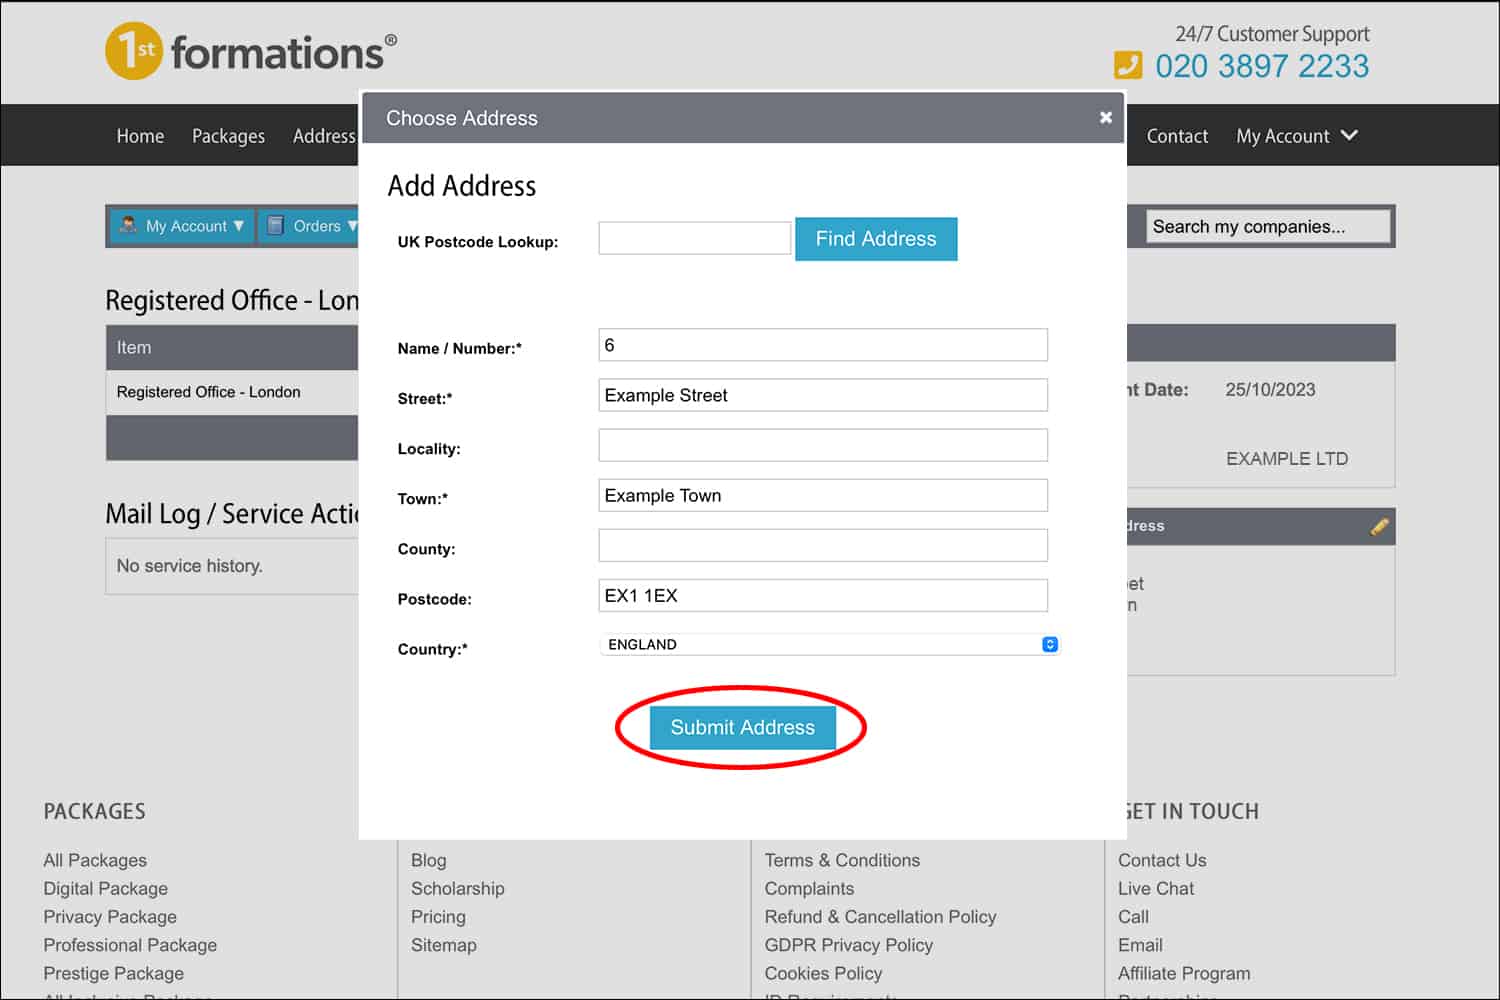 1st Formations' Online Company Manager Choose Address pop-up, highlighting the 'Submit Address' button with a red circle.